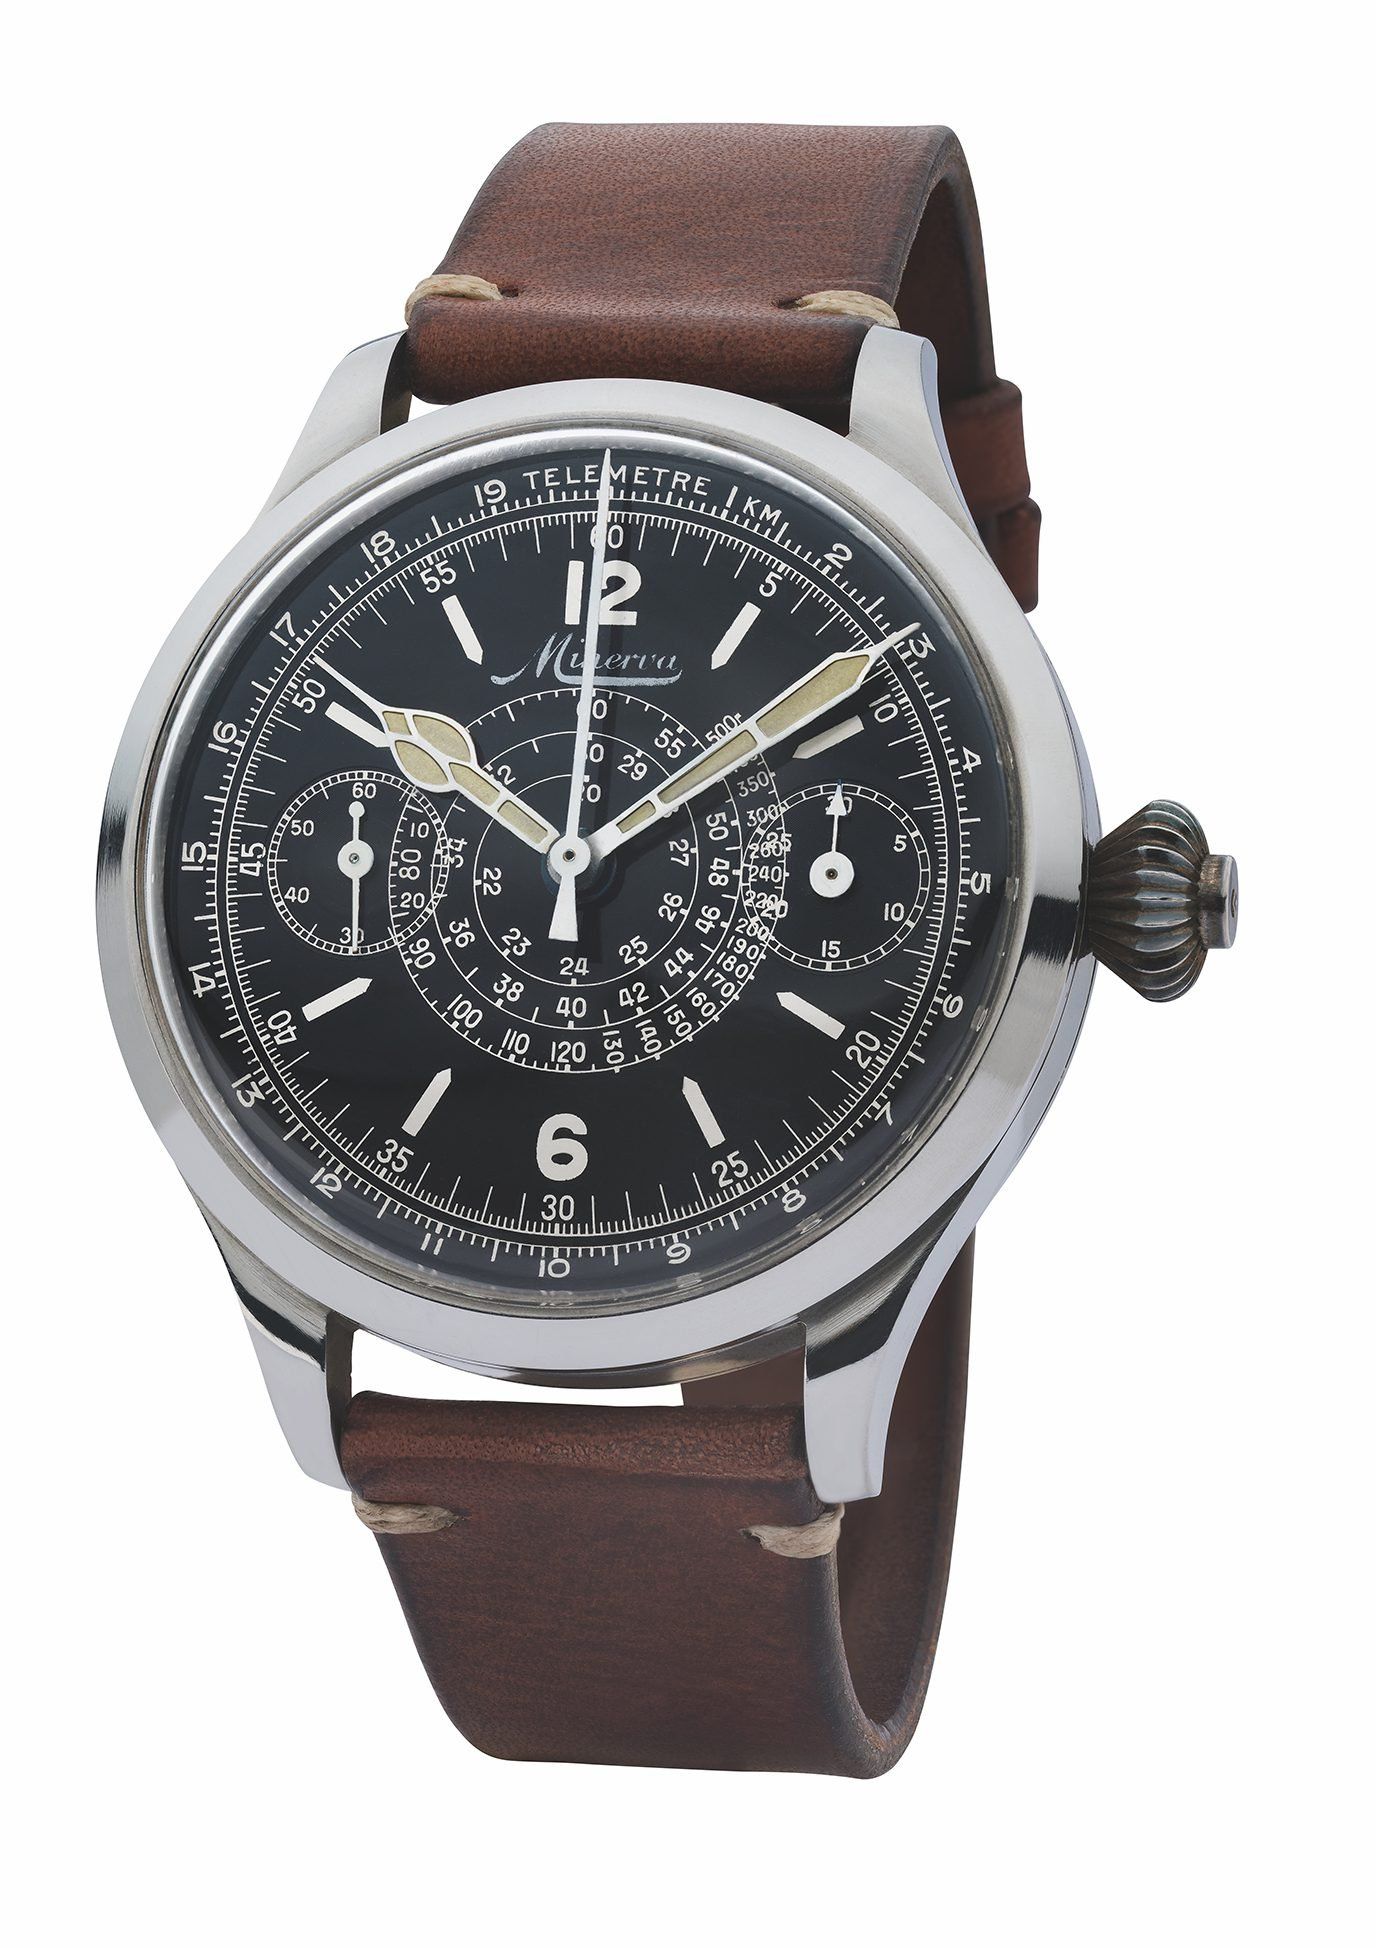 FEATURED: Montblanc 1858 Split Second Chronograph Limited Edition 18